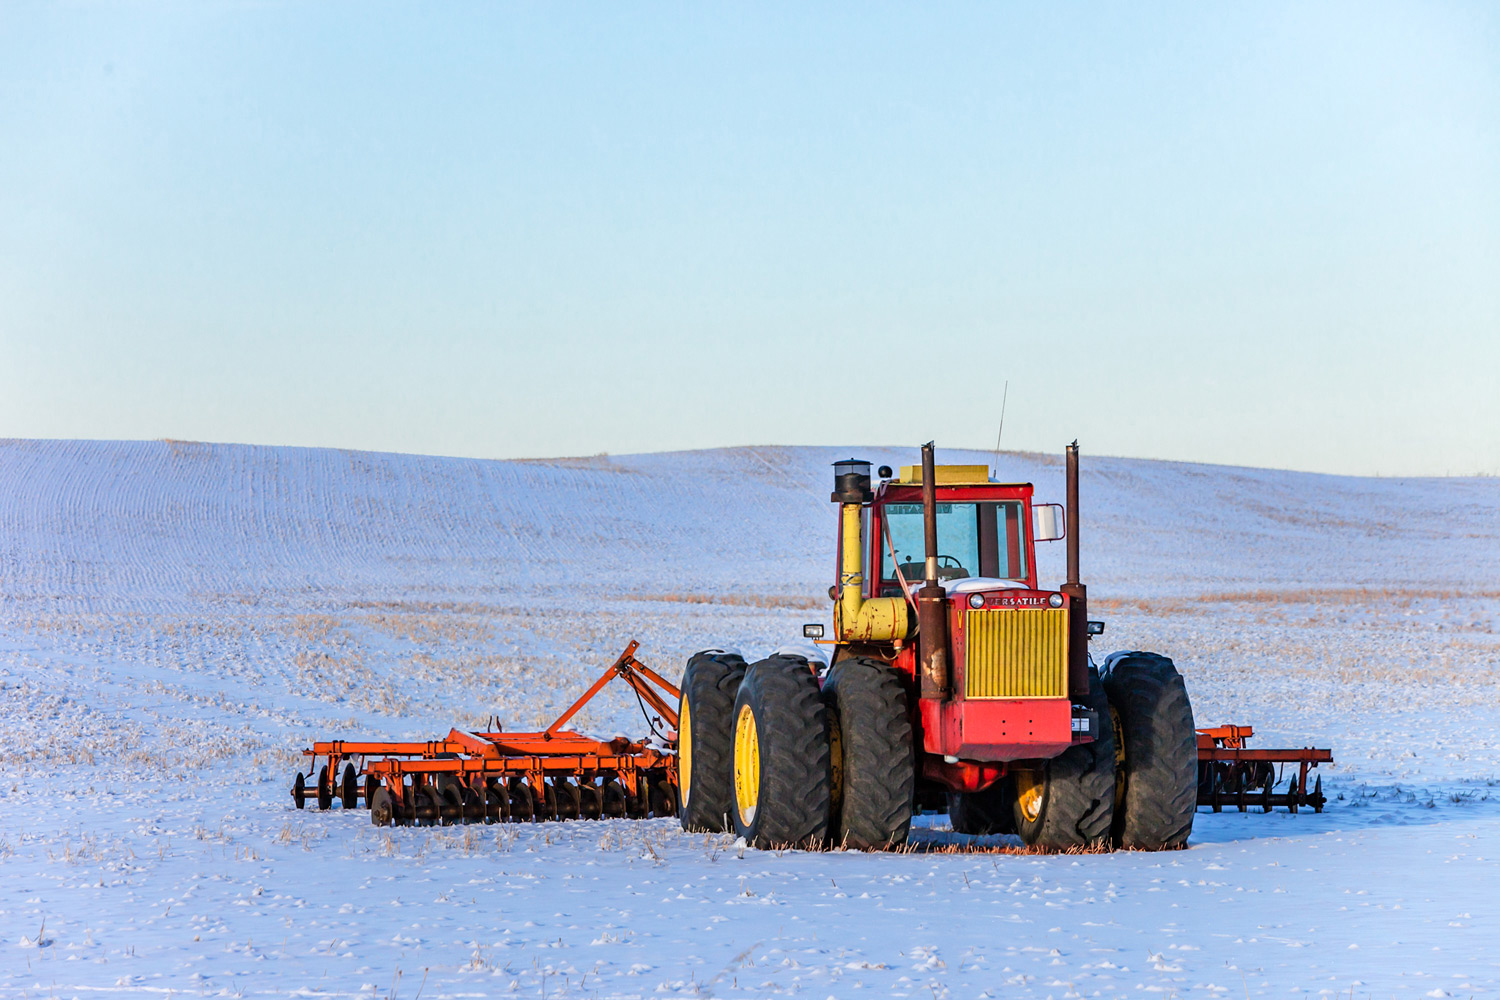 An old Versatile 900 tractor stands out in a field of snow near Fort Benton, Montana.&nbsp;→ License Photo